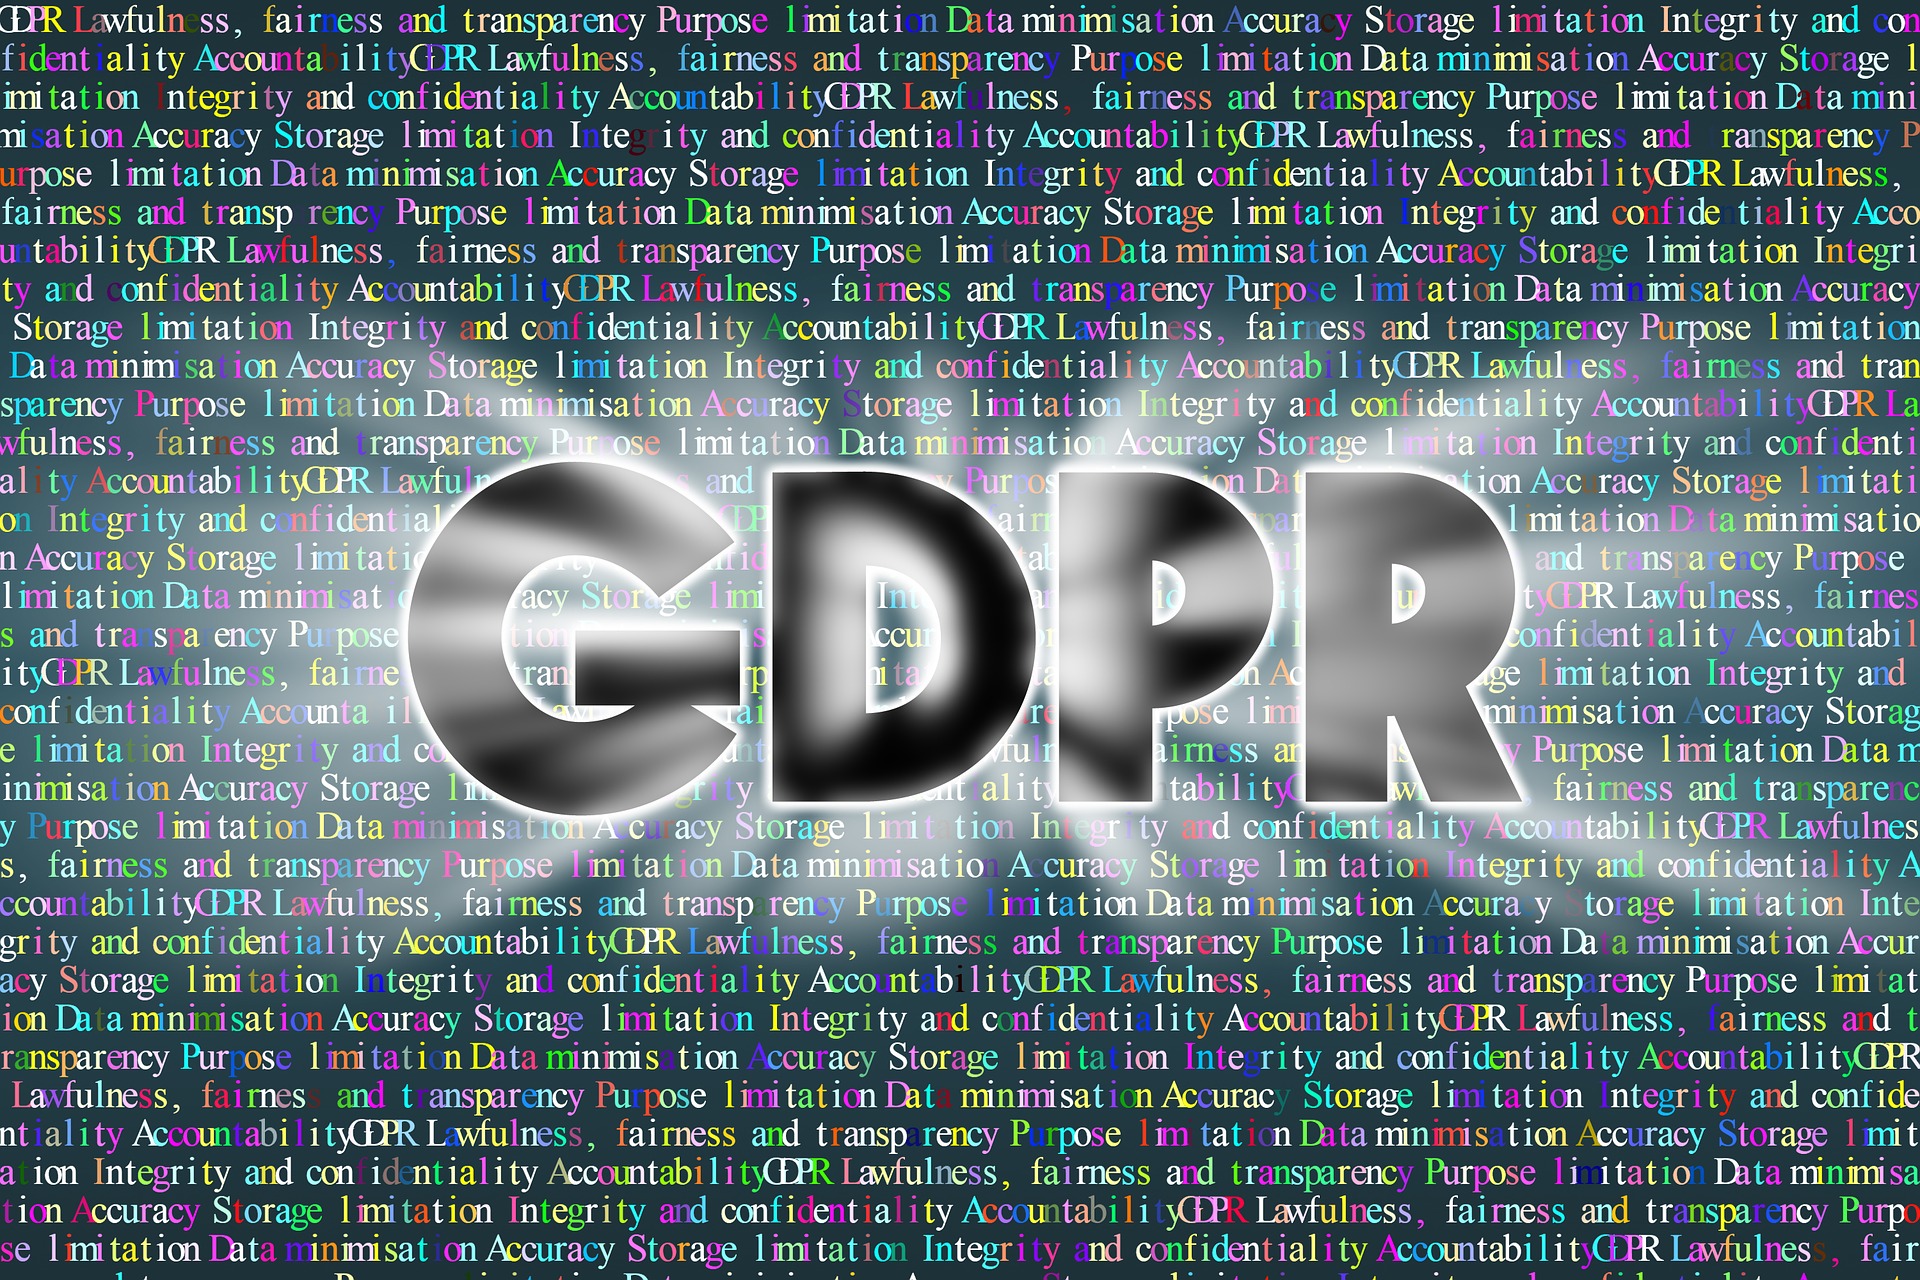 ICO issues first financial penalty under GDPR Virgilio Lobato